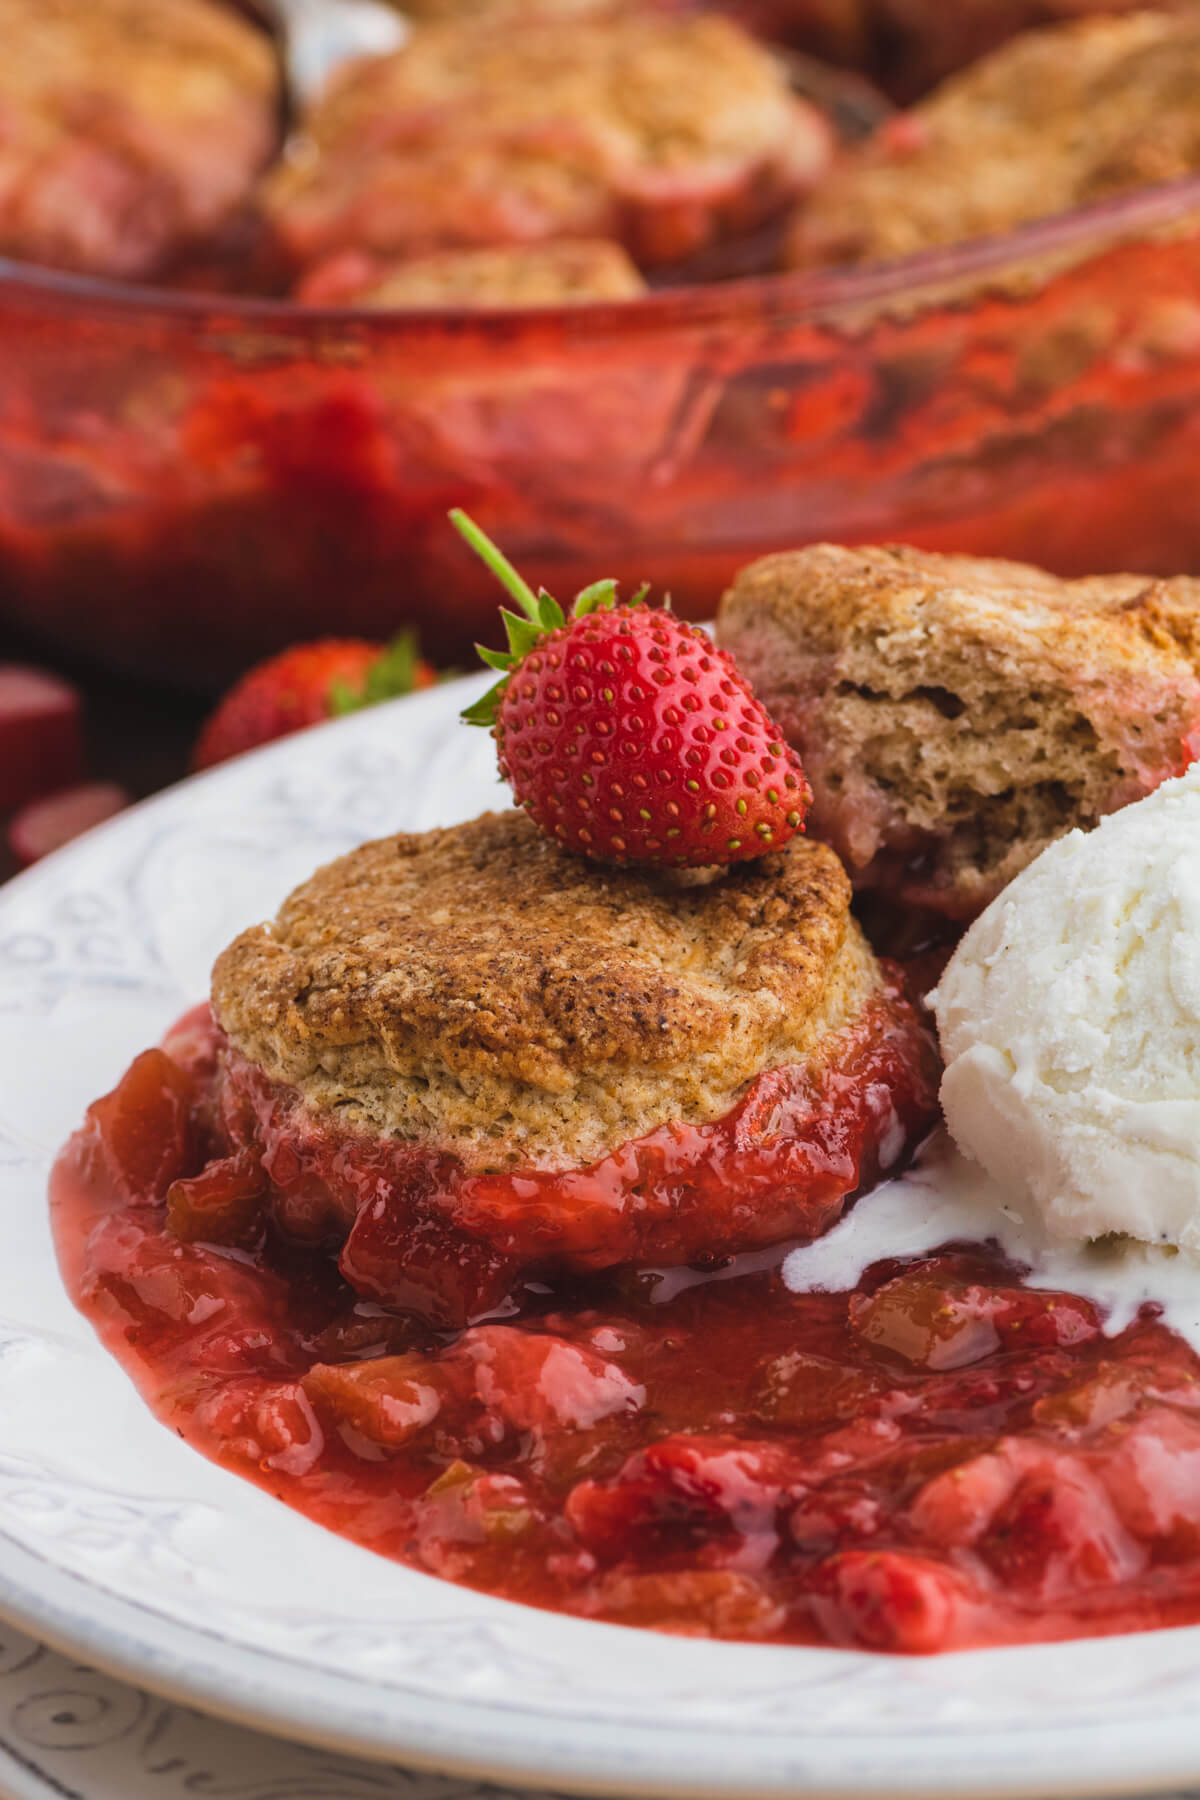 Strawberry Rhubarb Cobbler served on a white plate with a melting scoop of vanilla ice cream and a fresh ripe strawberry.